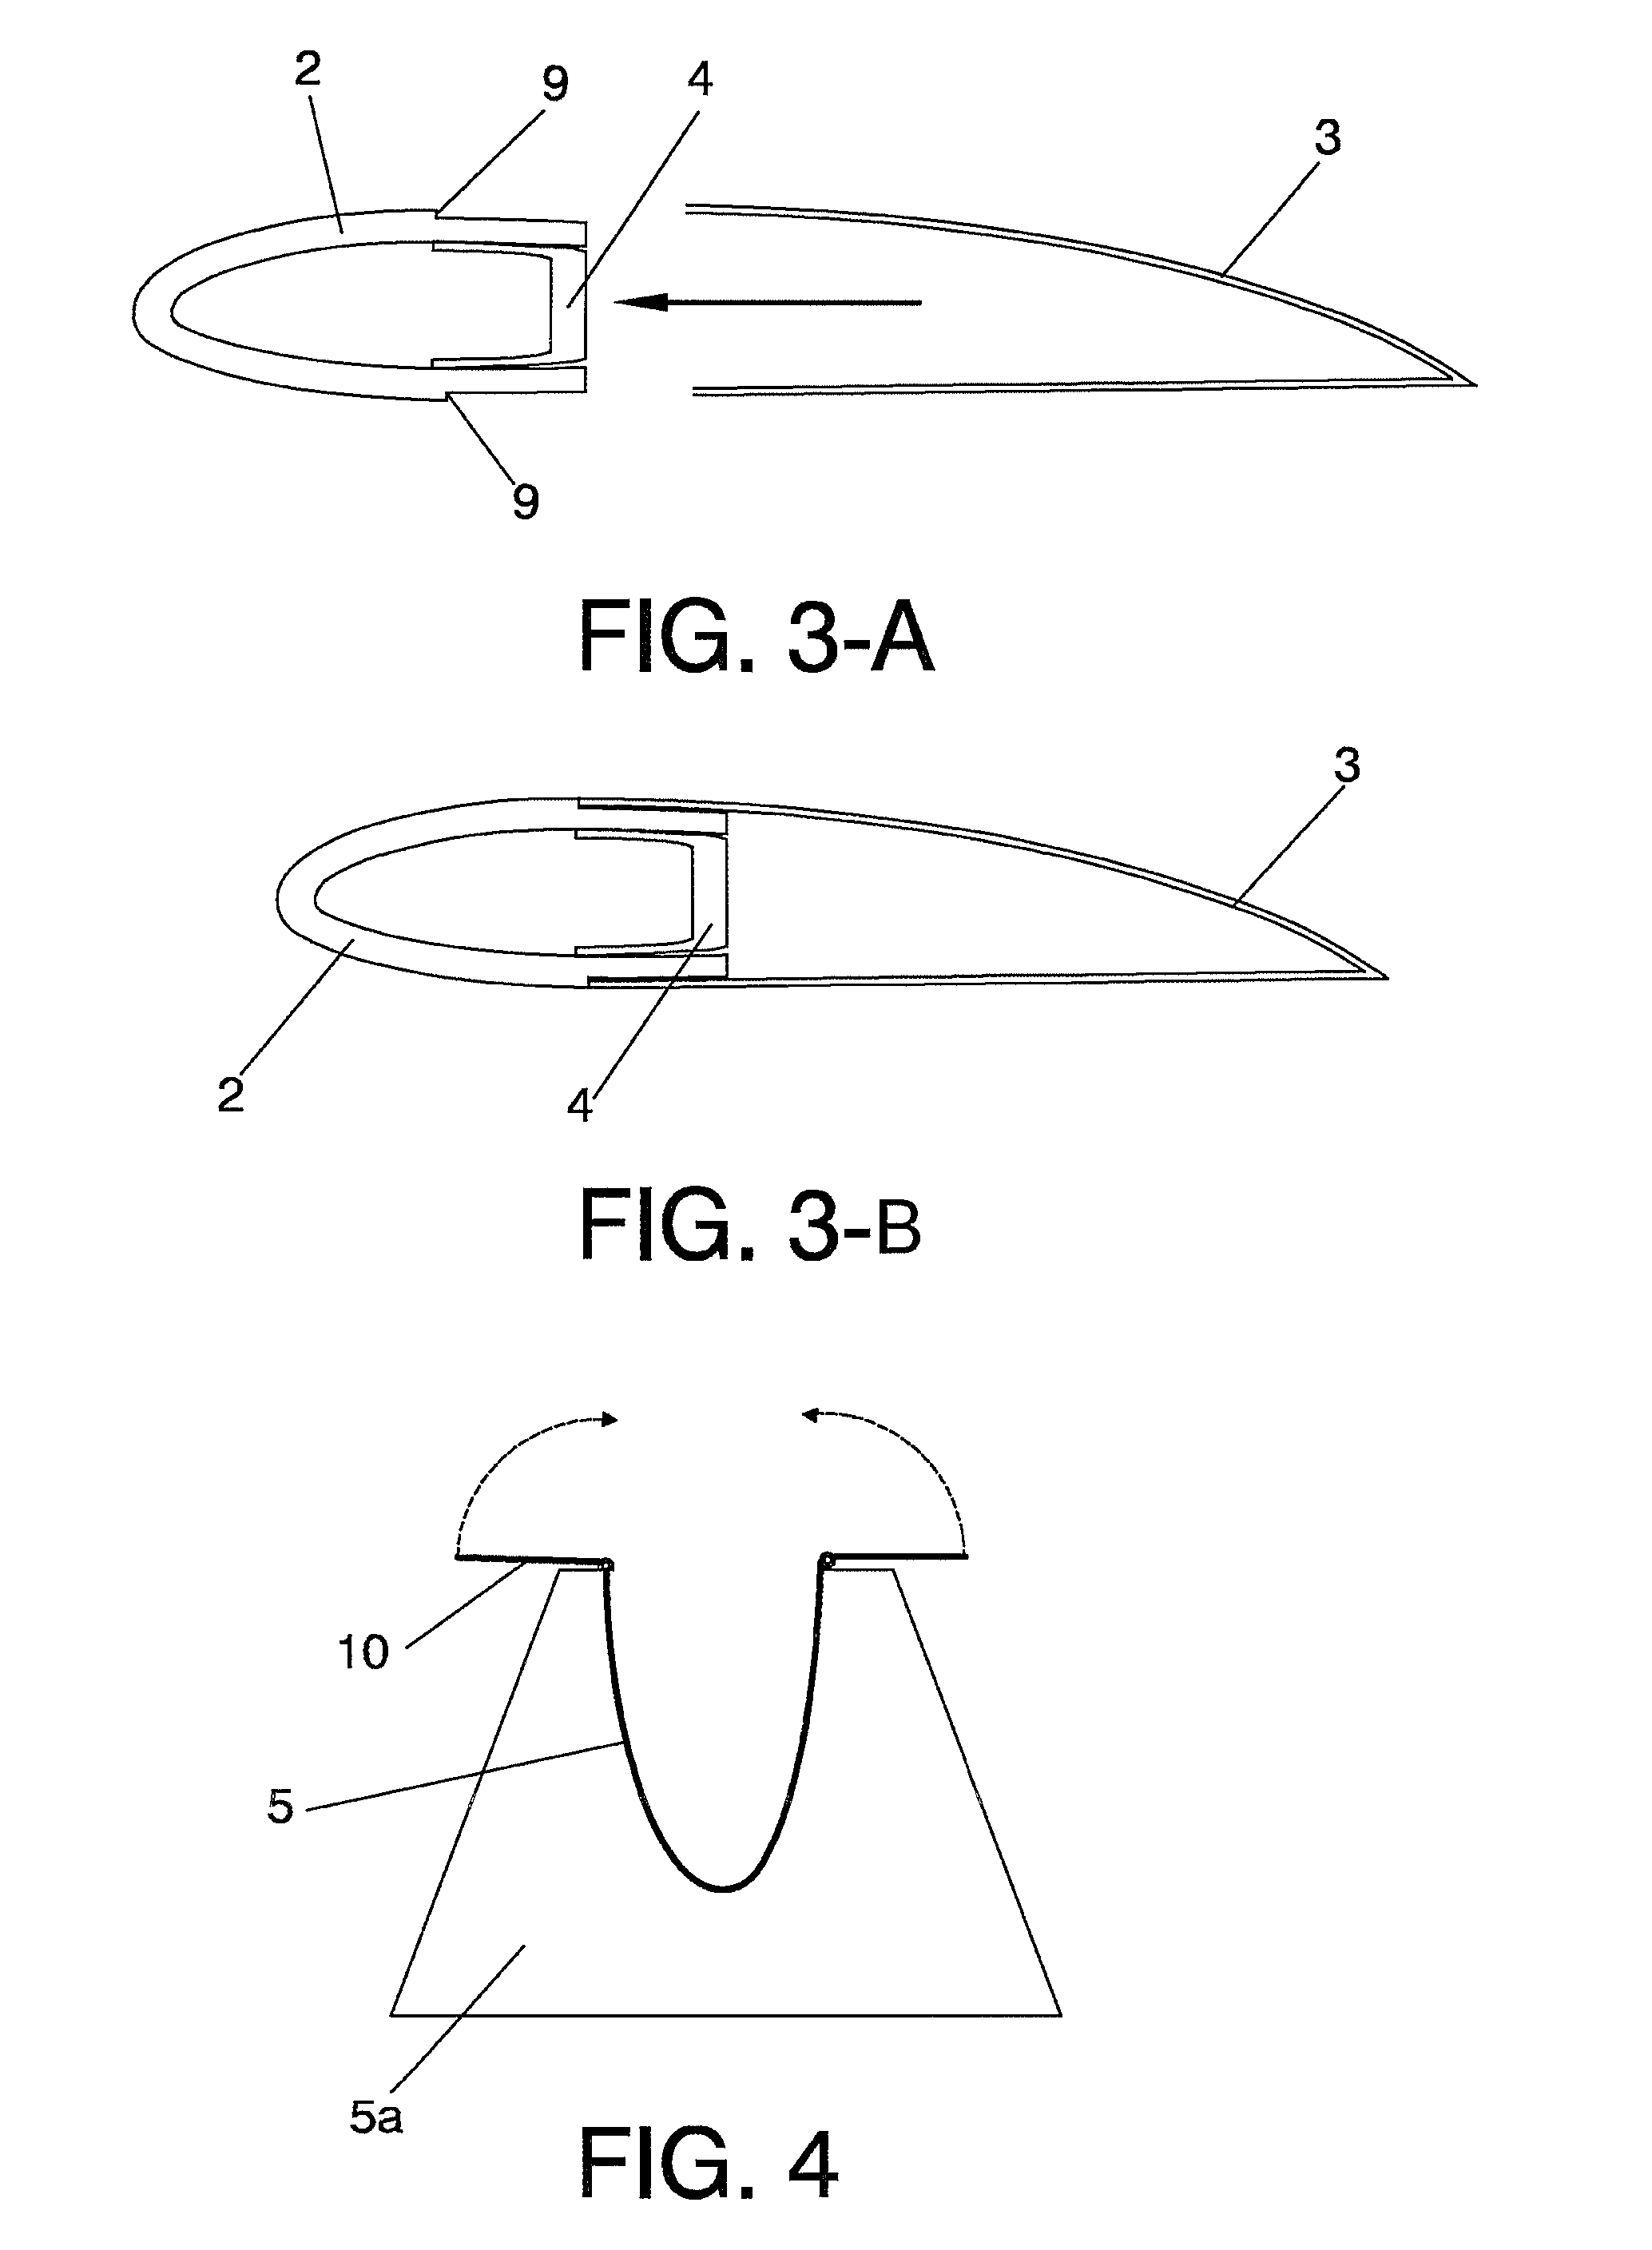 Method for manufacturing wind turbine blades, blades for propellors, wings, or similar structures, and structure in the form of a blade obtained by means of this procedure